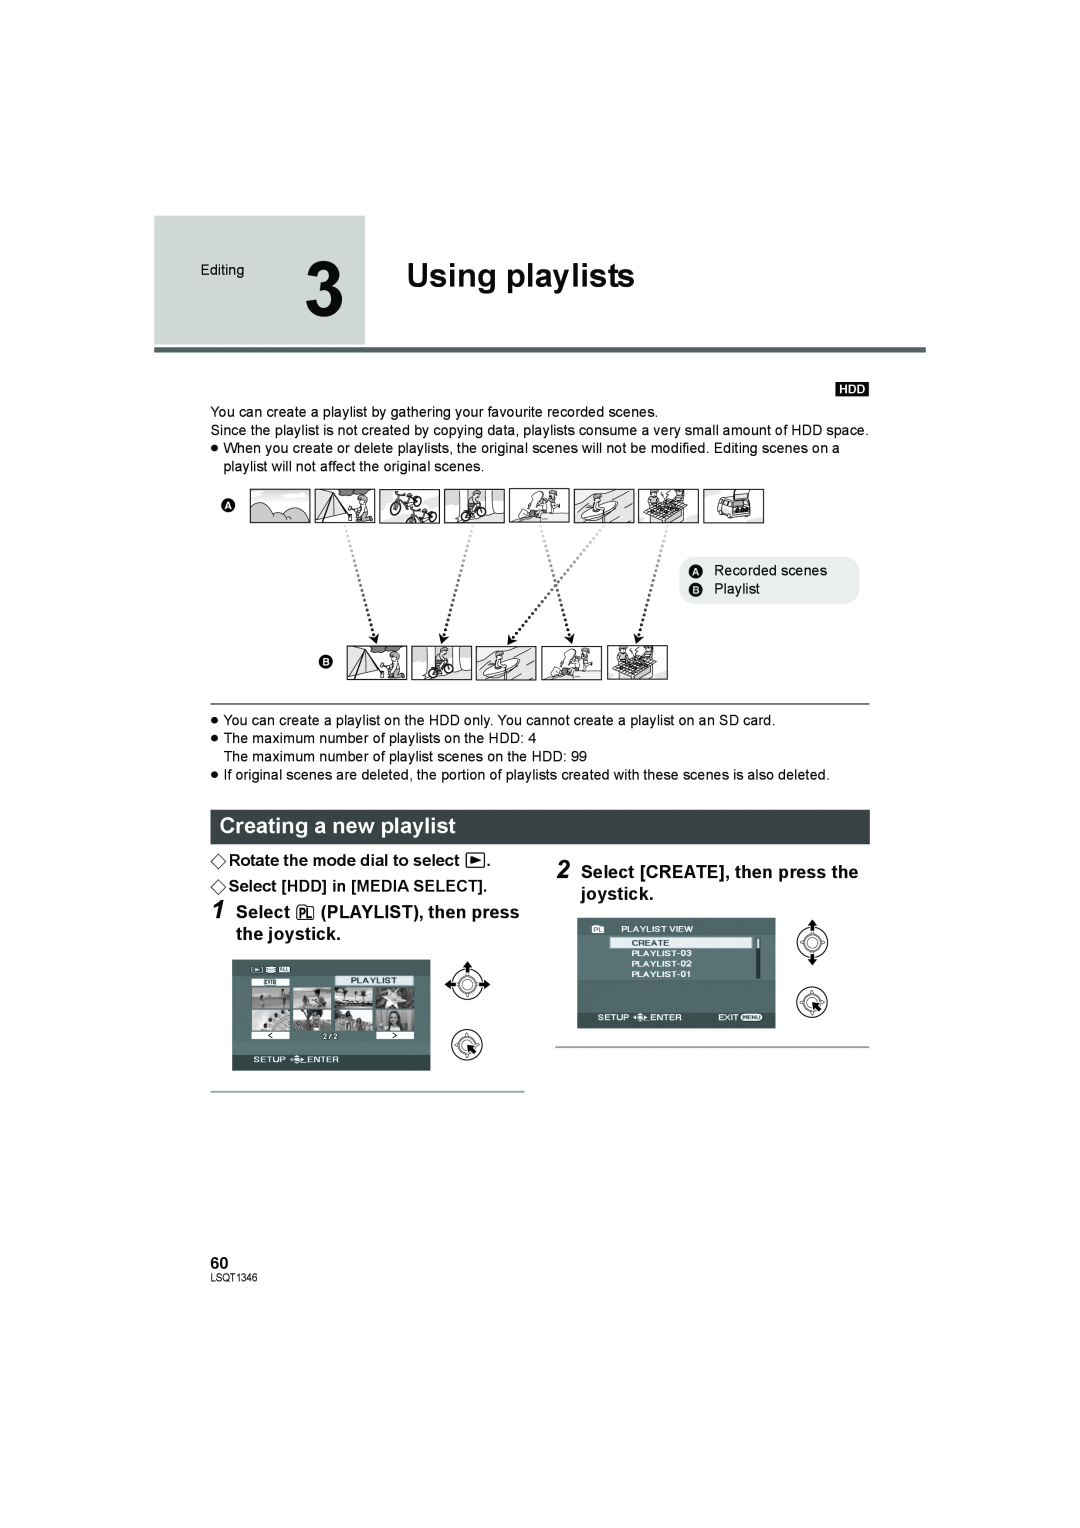 Panasonic SDR-H50 operating instructions Using playlists, Creating a new playlist, Select CREATE, then press the joystick 